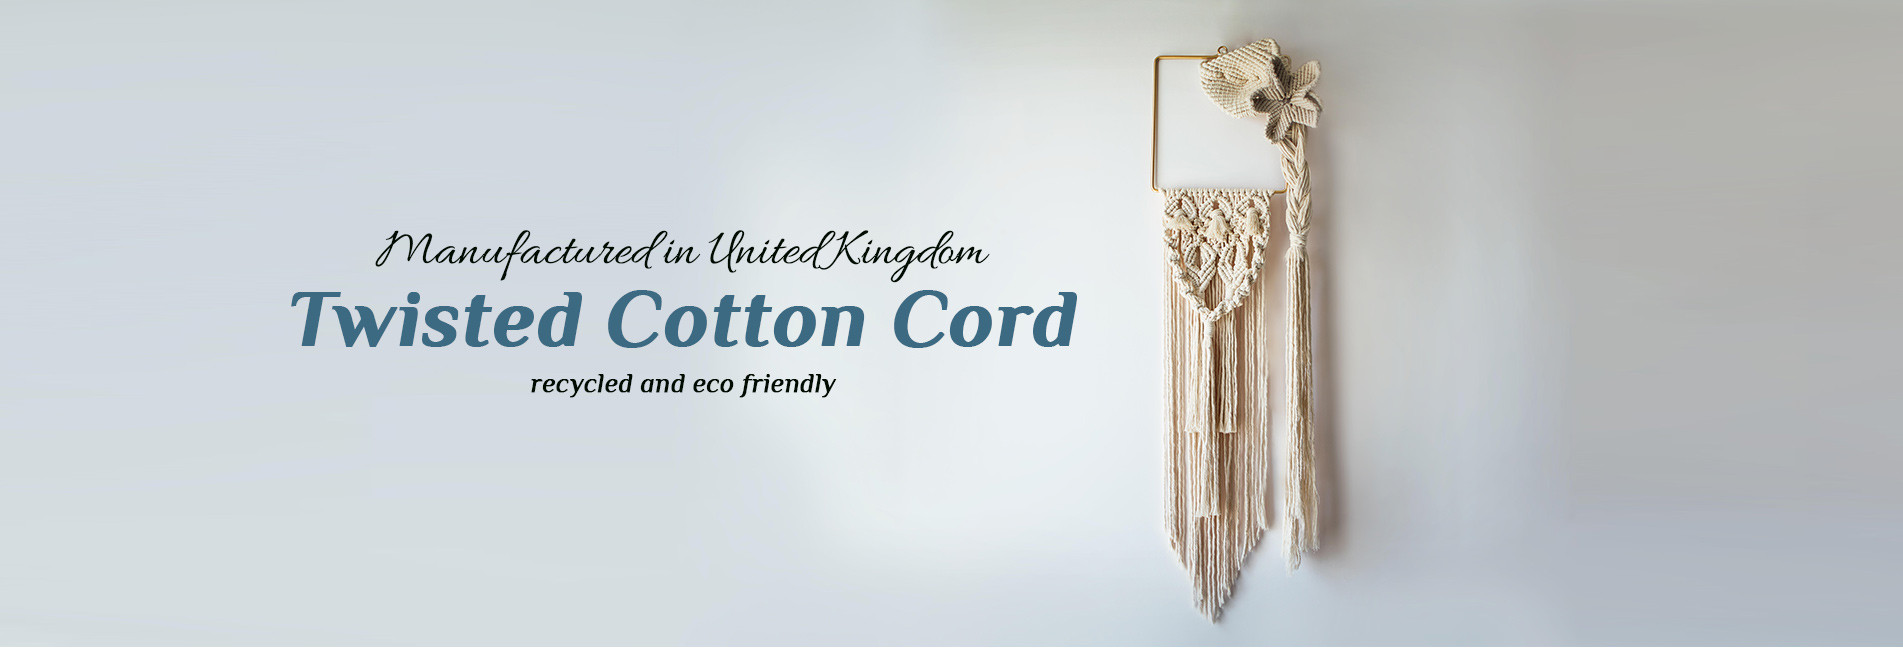 Twisted Cotton Cords